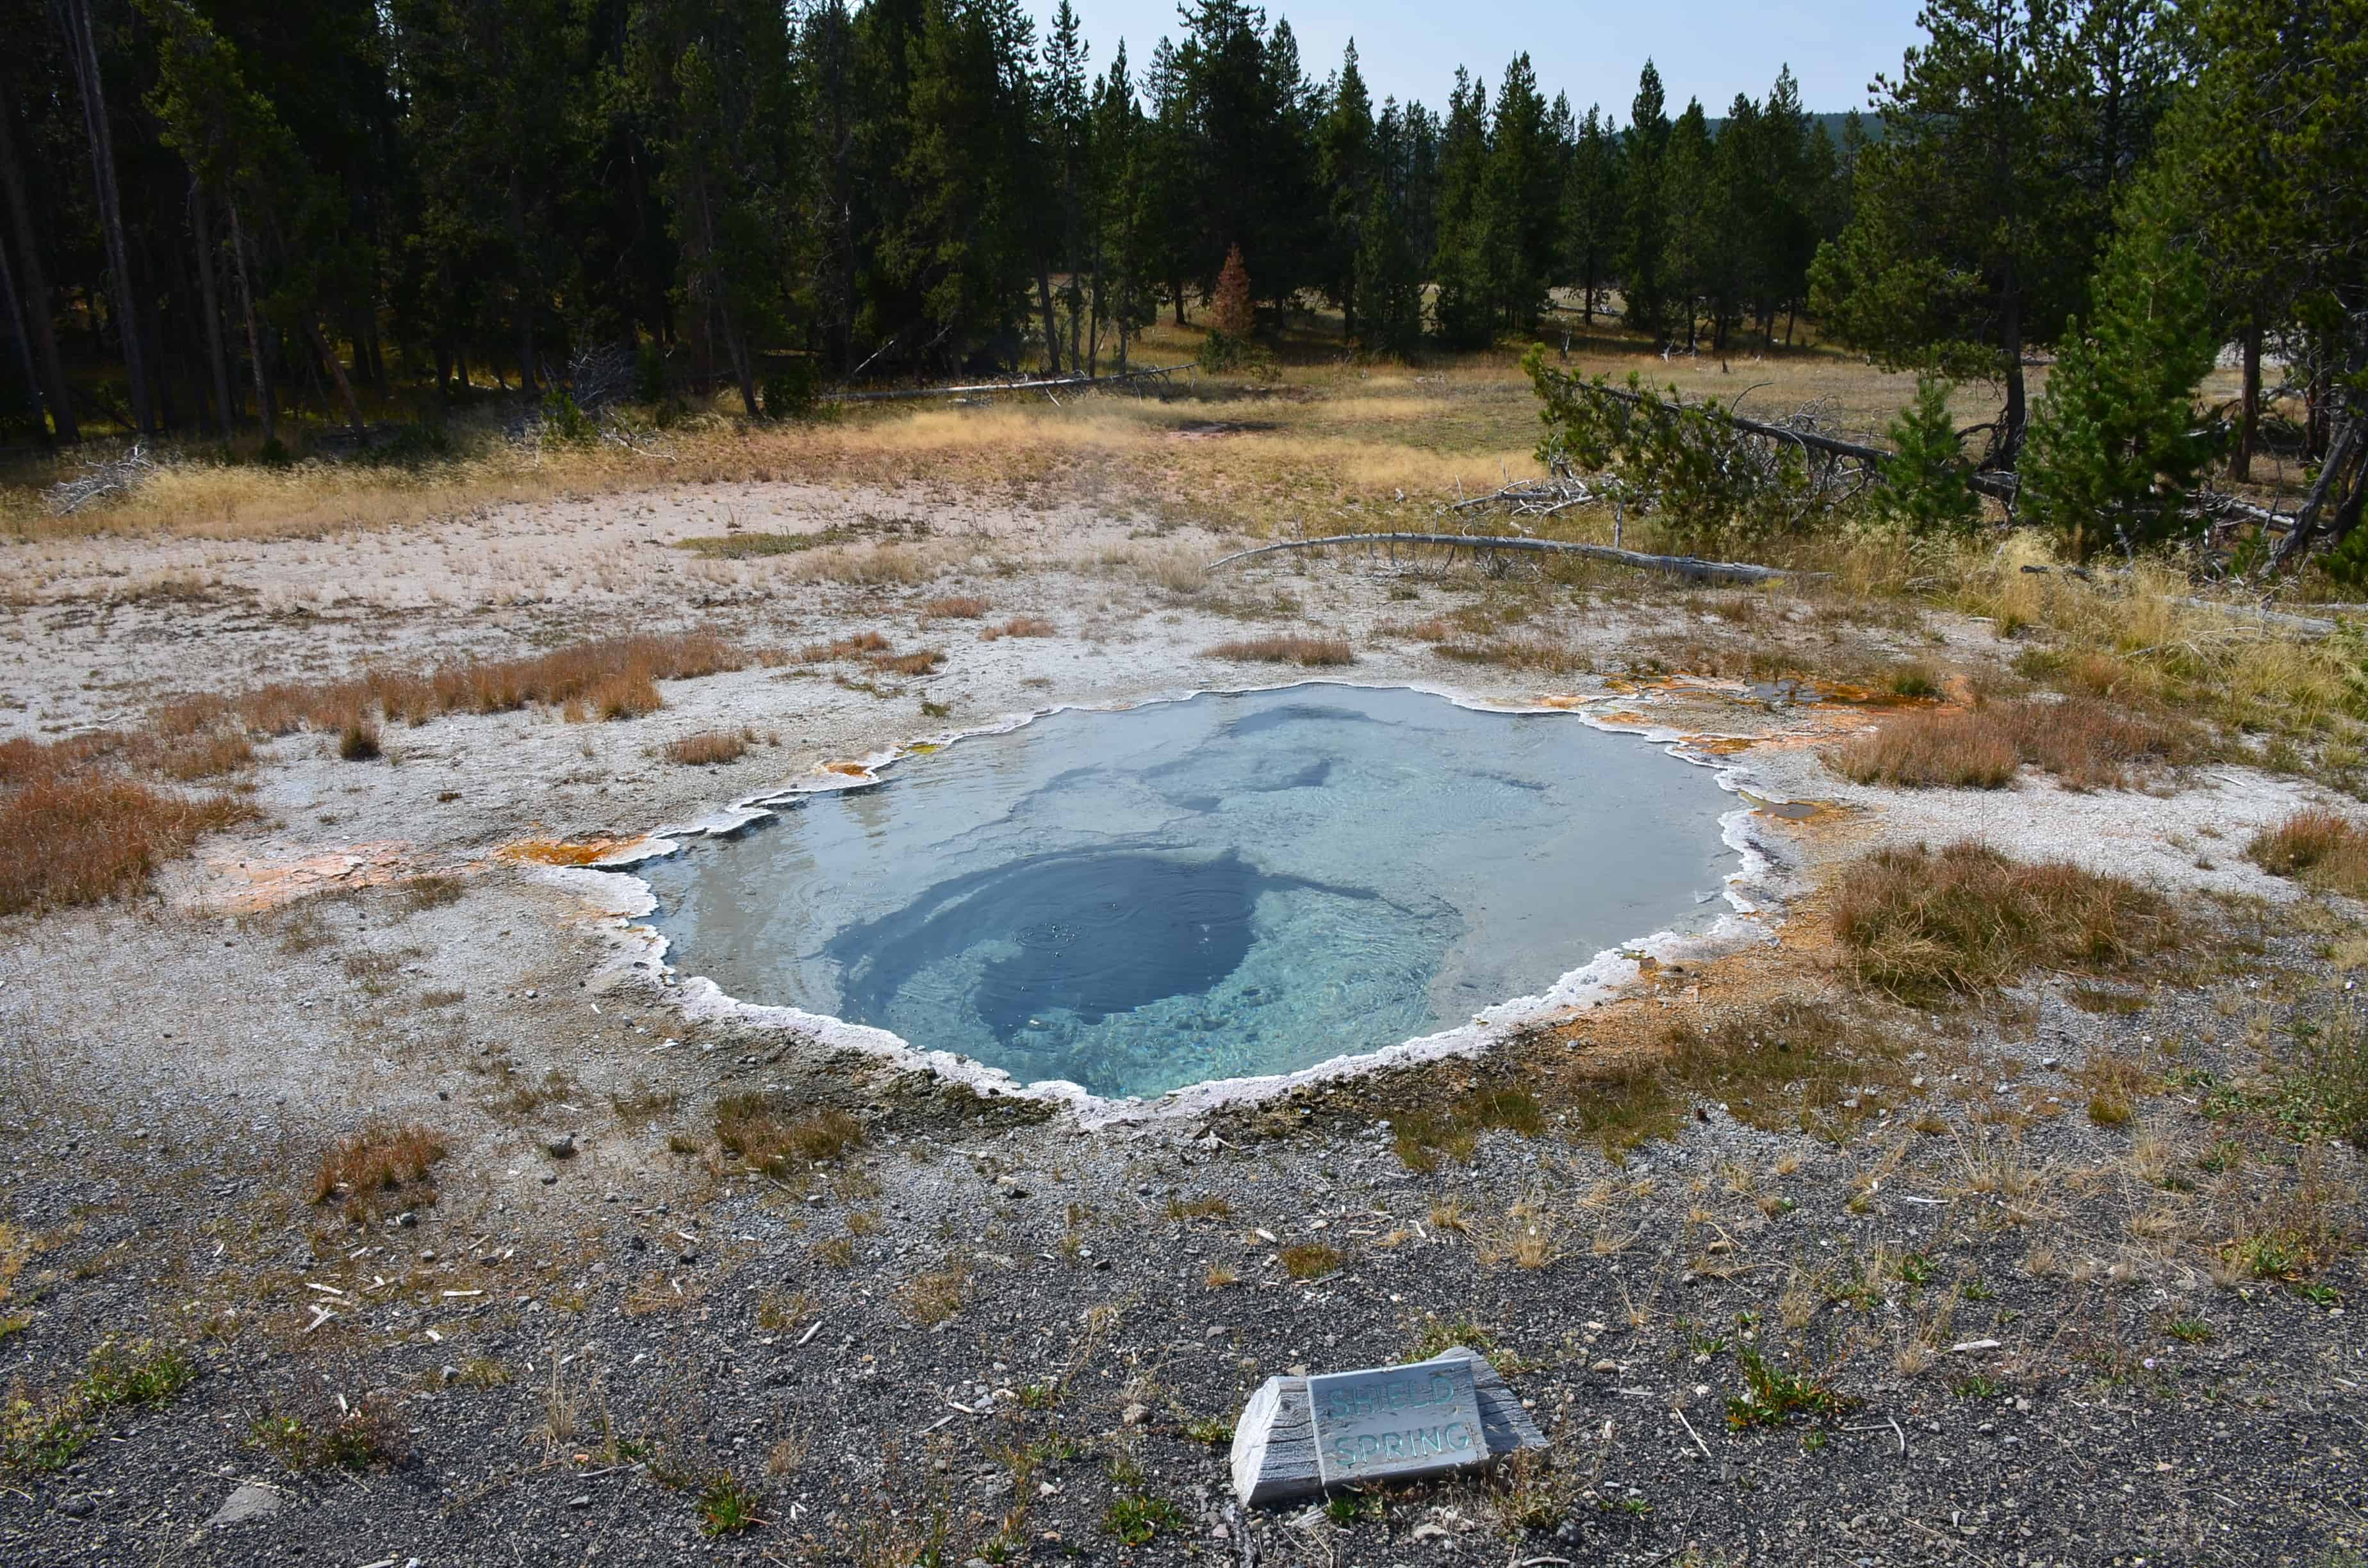 Shield Spring at the Upper Geyser Basin in Yellowstone National Park, Wyoming